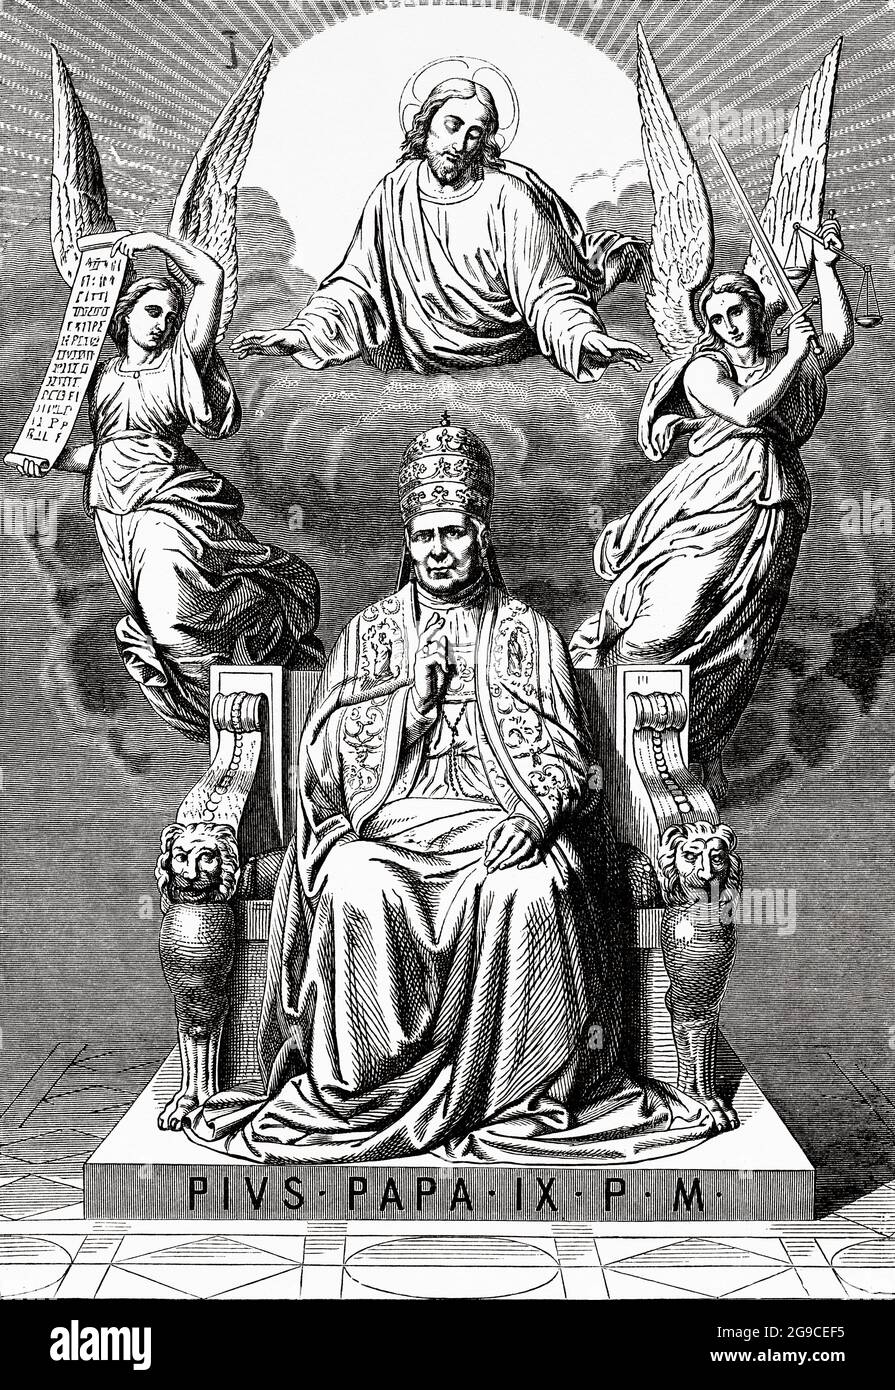 Pope Pius IX. Jesus Christ protects him and the angels represent justice and mercy. Giovanni Maria Mastai Ferretti (1792-1878) elected Pope in 1846. Pius proclaimed the dogma of the Immaculate Conception in 1854, and in 1869 convened the First Vatican Council. Old 19th century engraved illustration from Jesus Christ by Veuillot 1881 Stock Photo